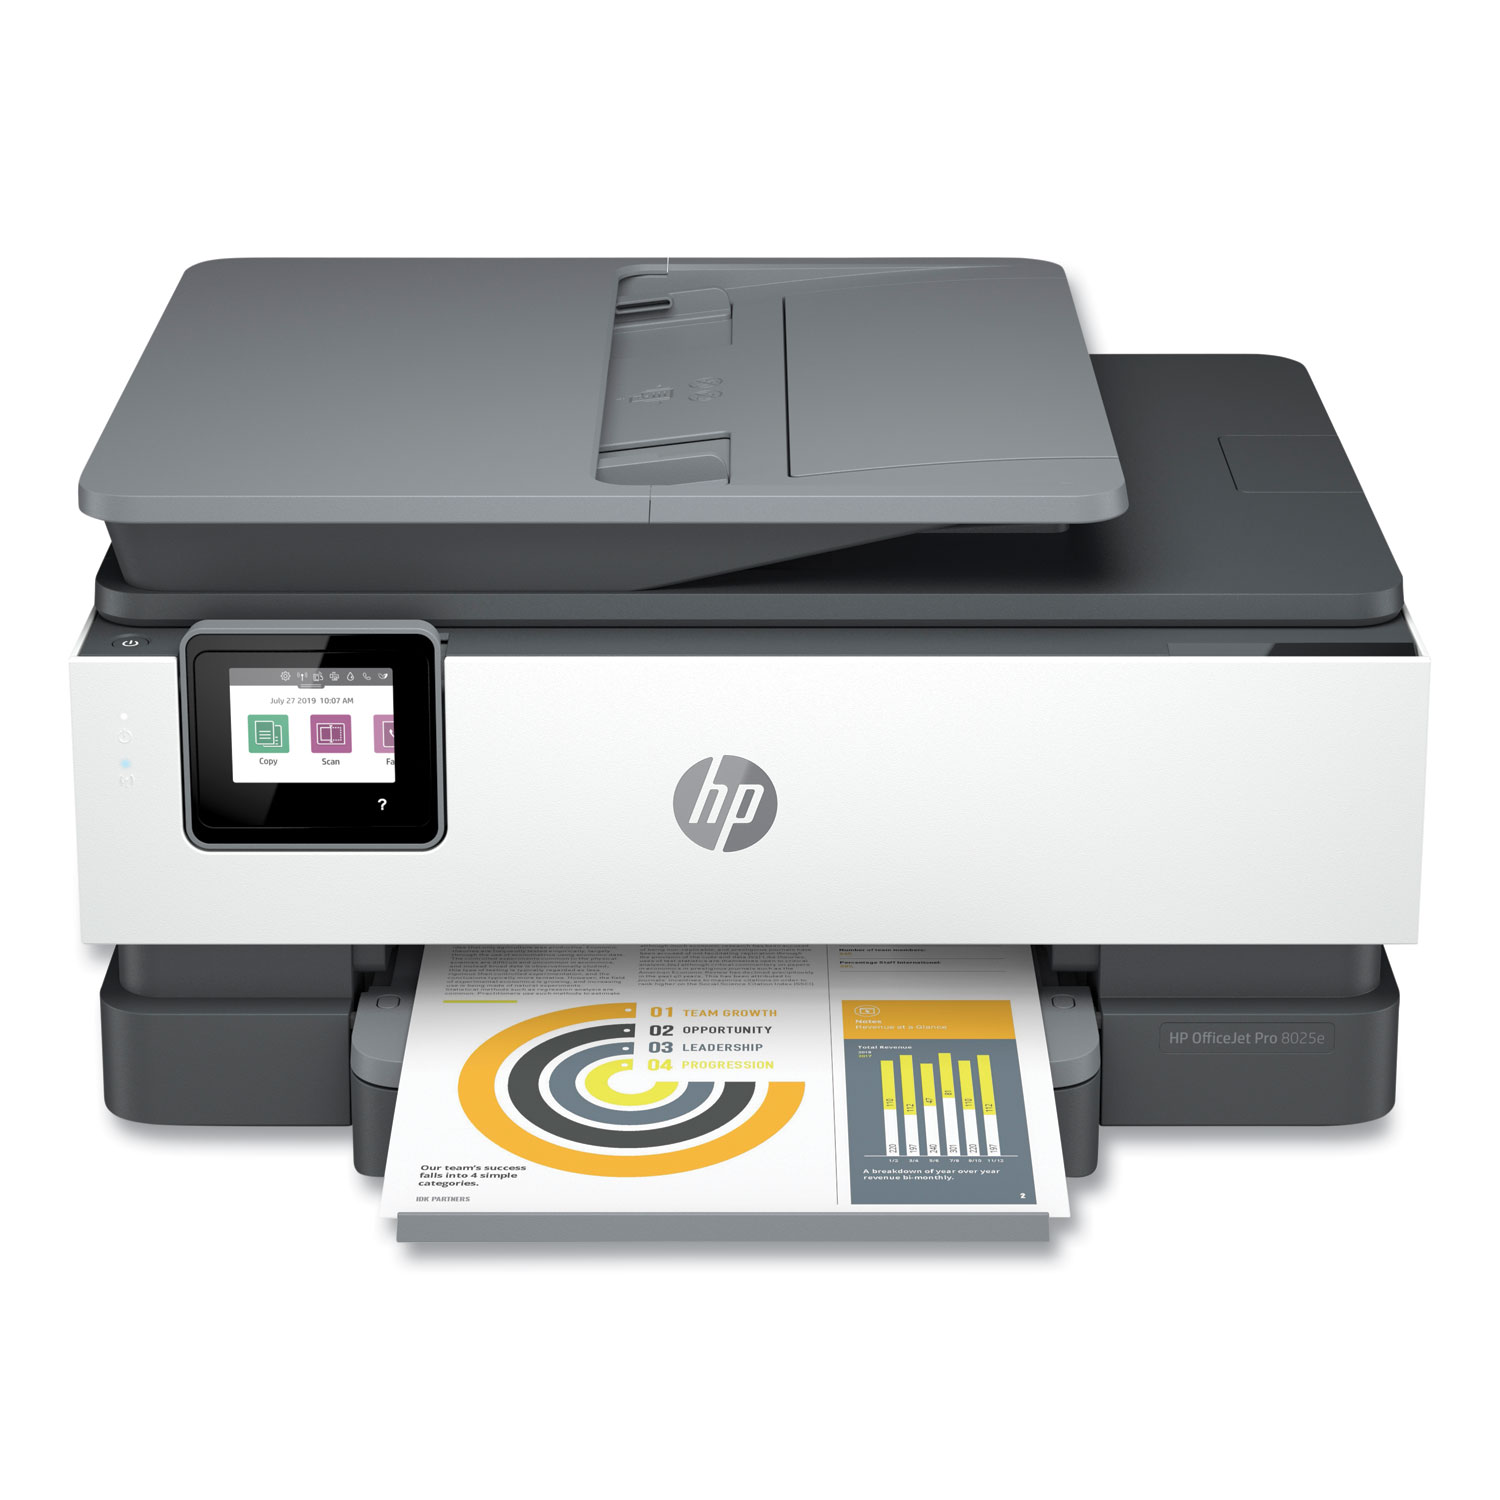 NEW]【Express Deliverynew】HP 7720 A3 OfficeJet Pro Wide Format